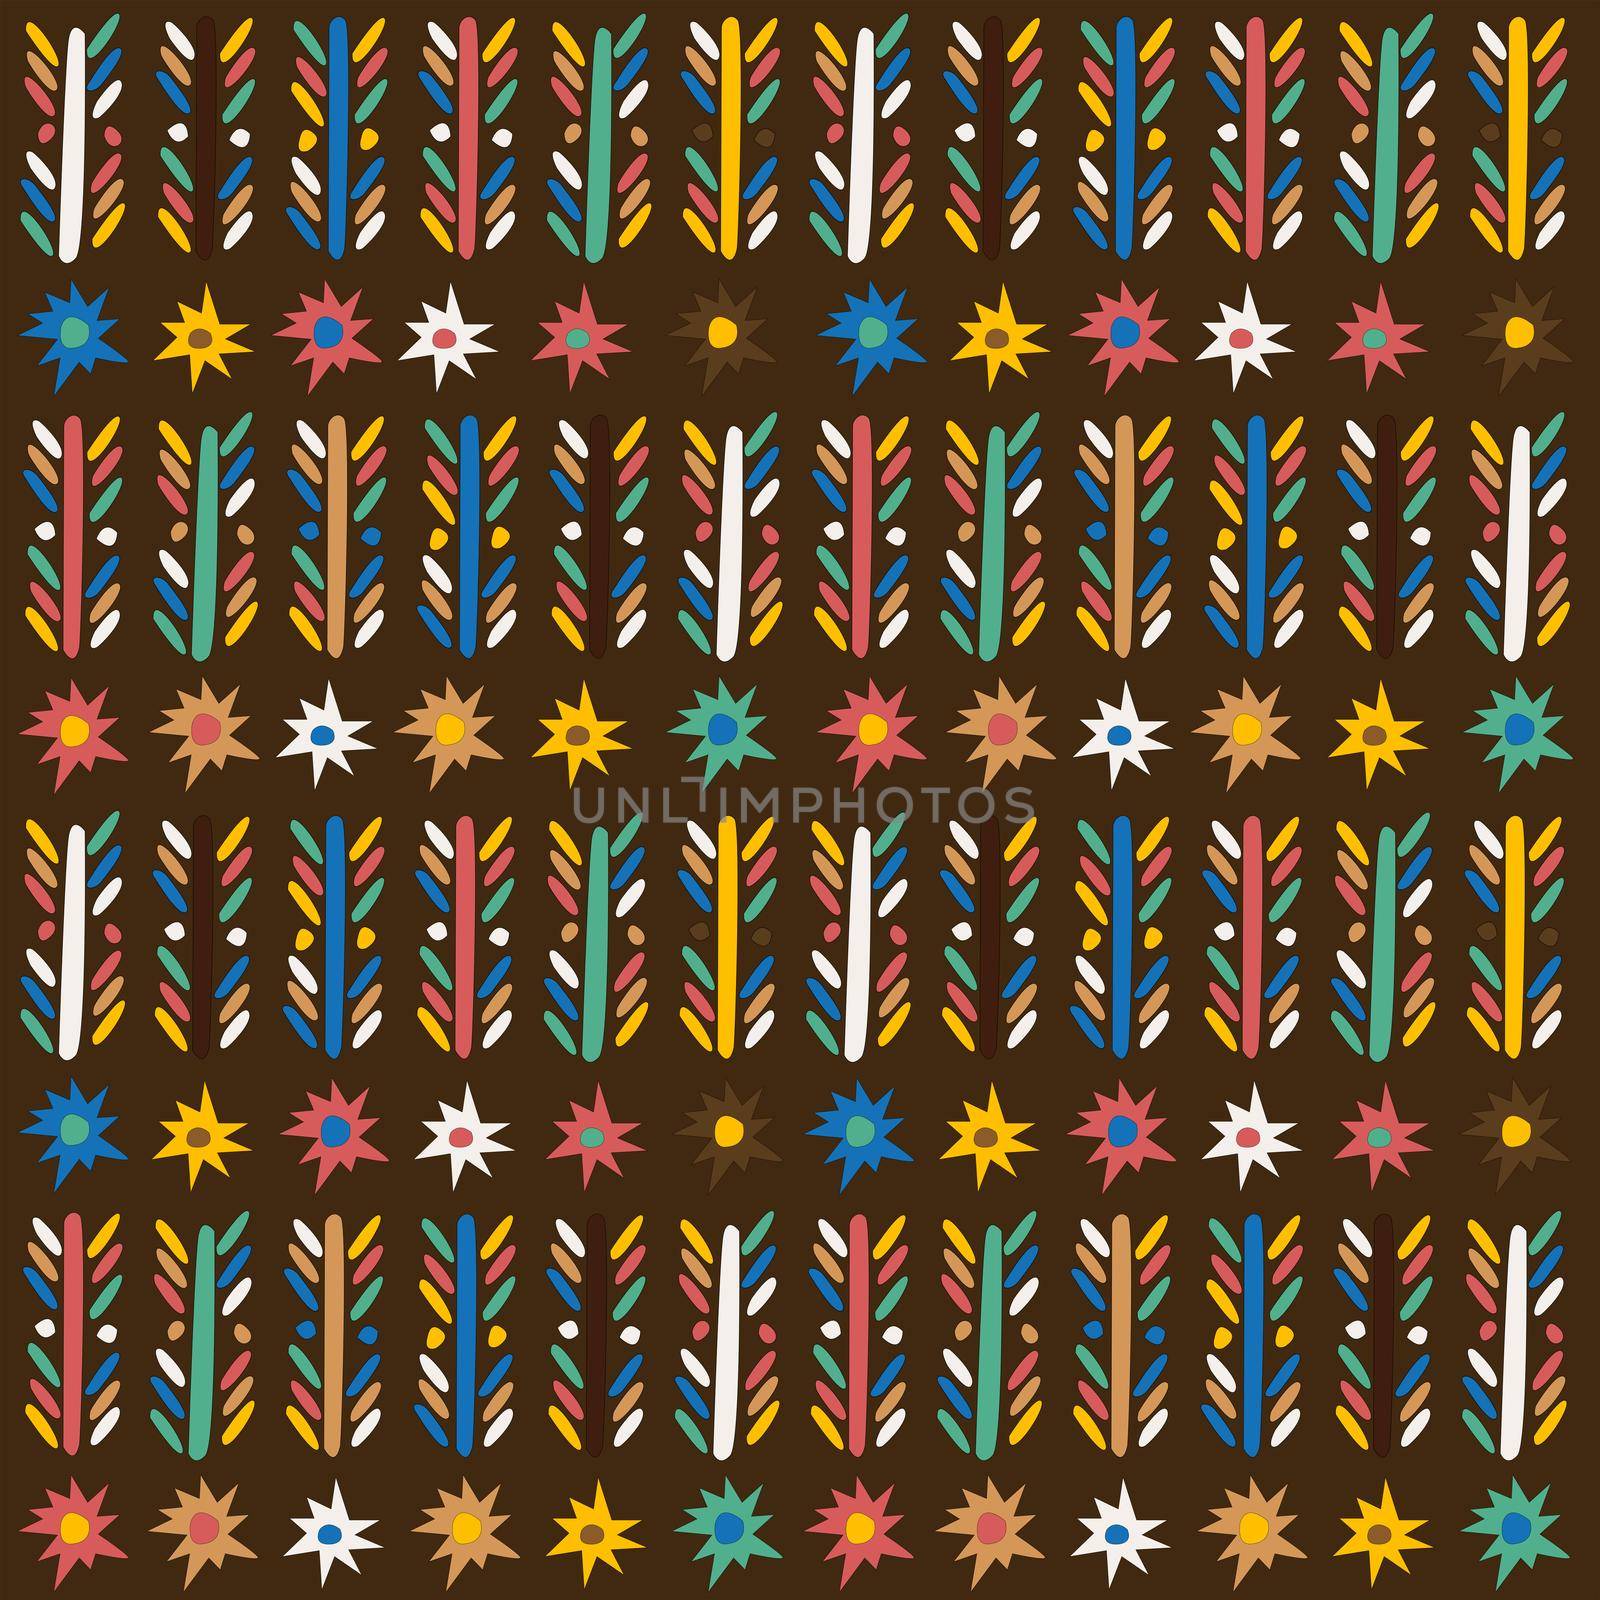 African seamless background with flowers, stripes and stars by hibrida13